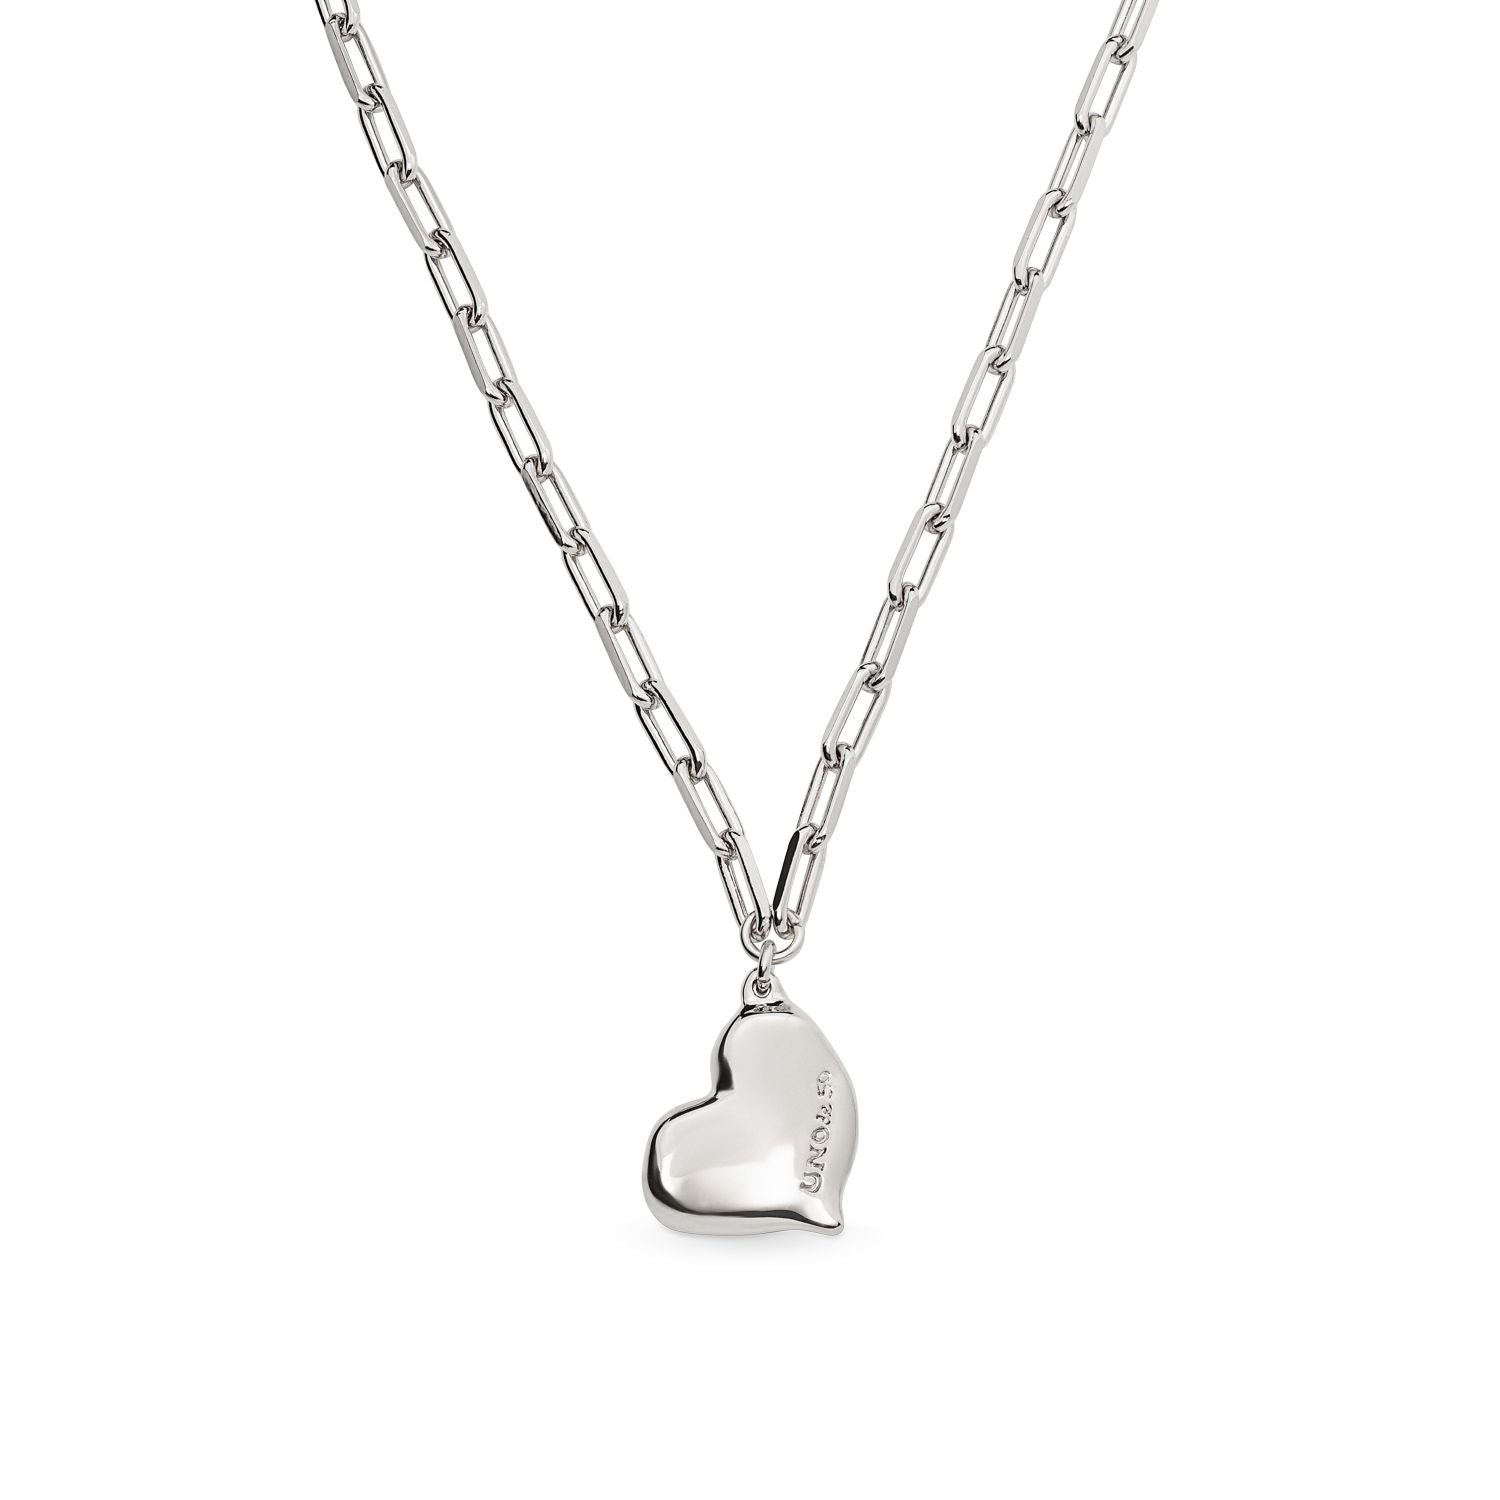 UNOde50 – Heartbeat Necklace Silver